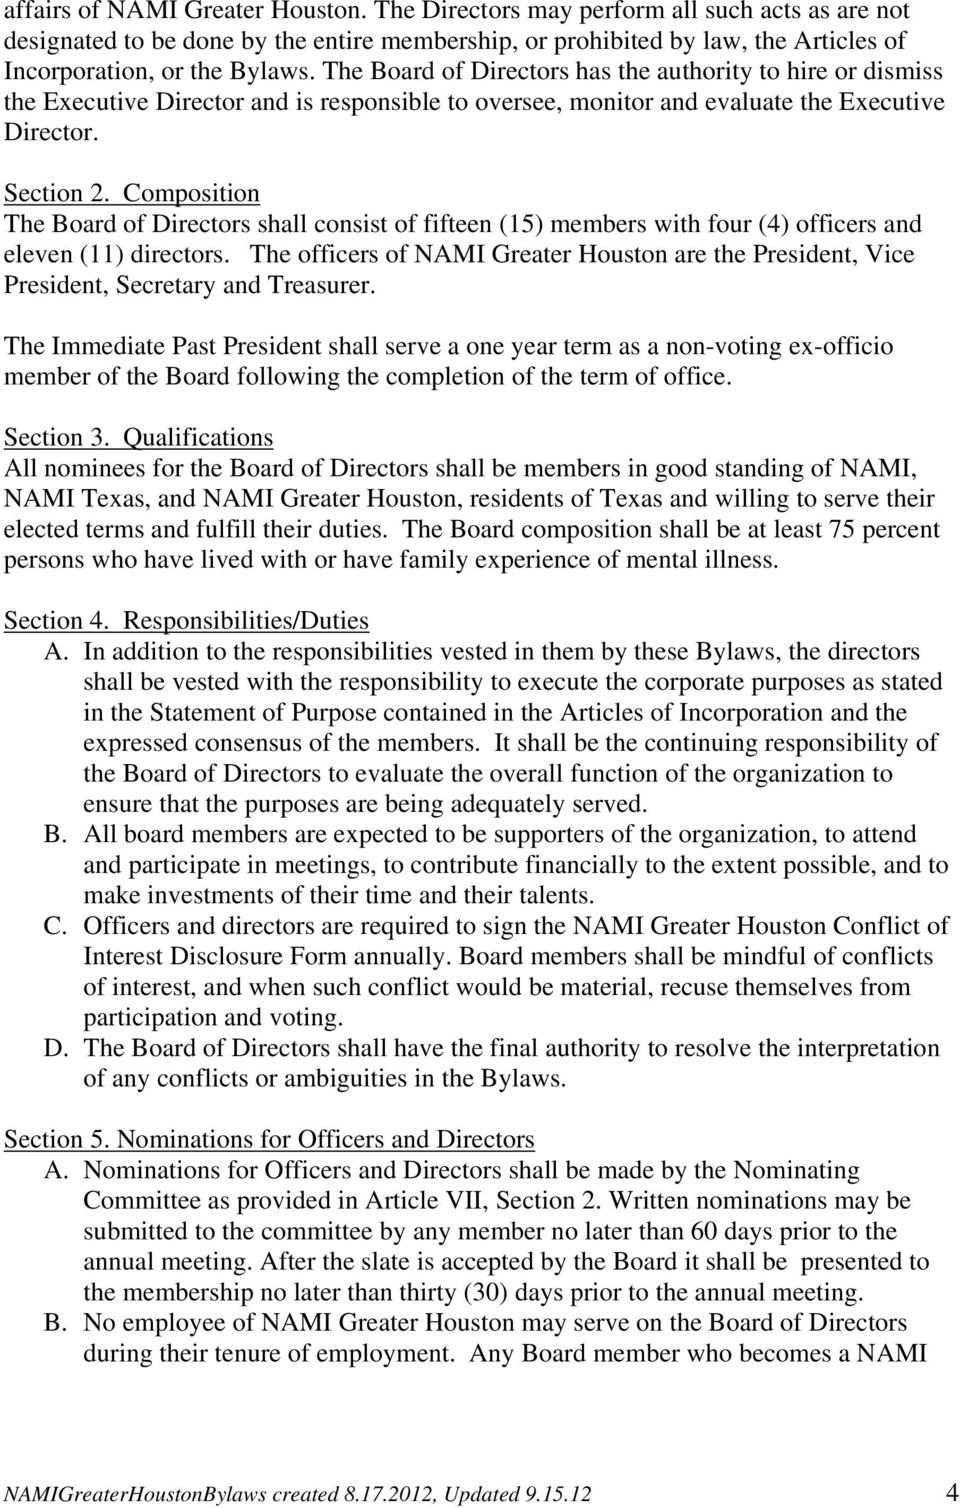 Composition The Board of Directors shall consist of fifteen (15) members with four (4) officers and eleven (11) directors.